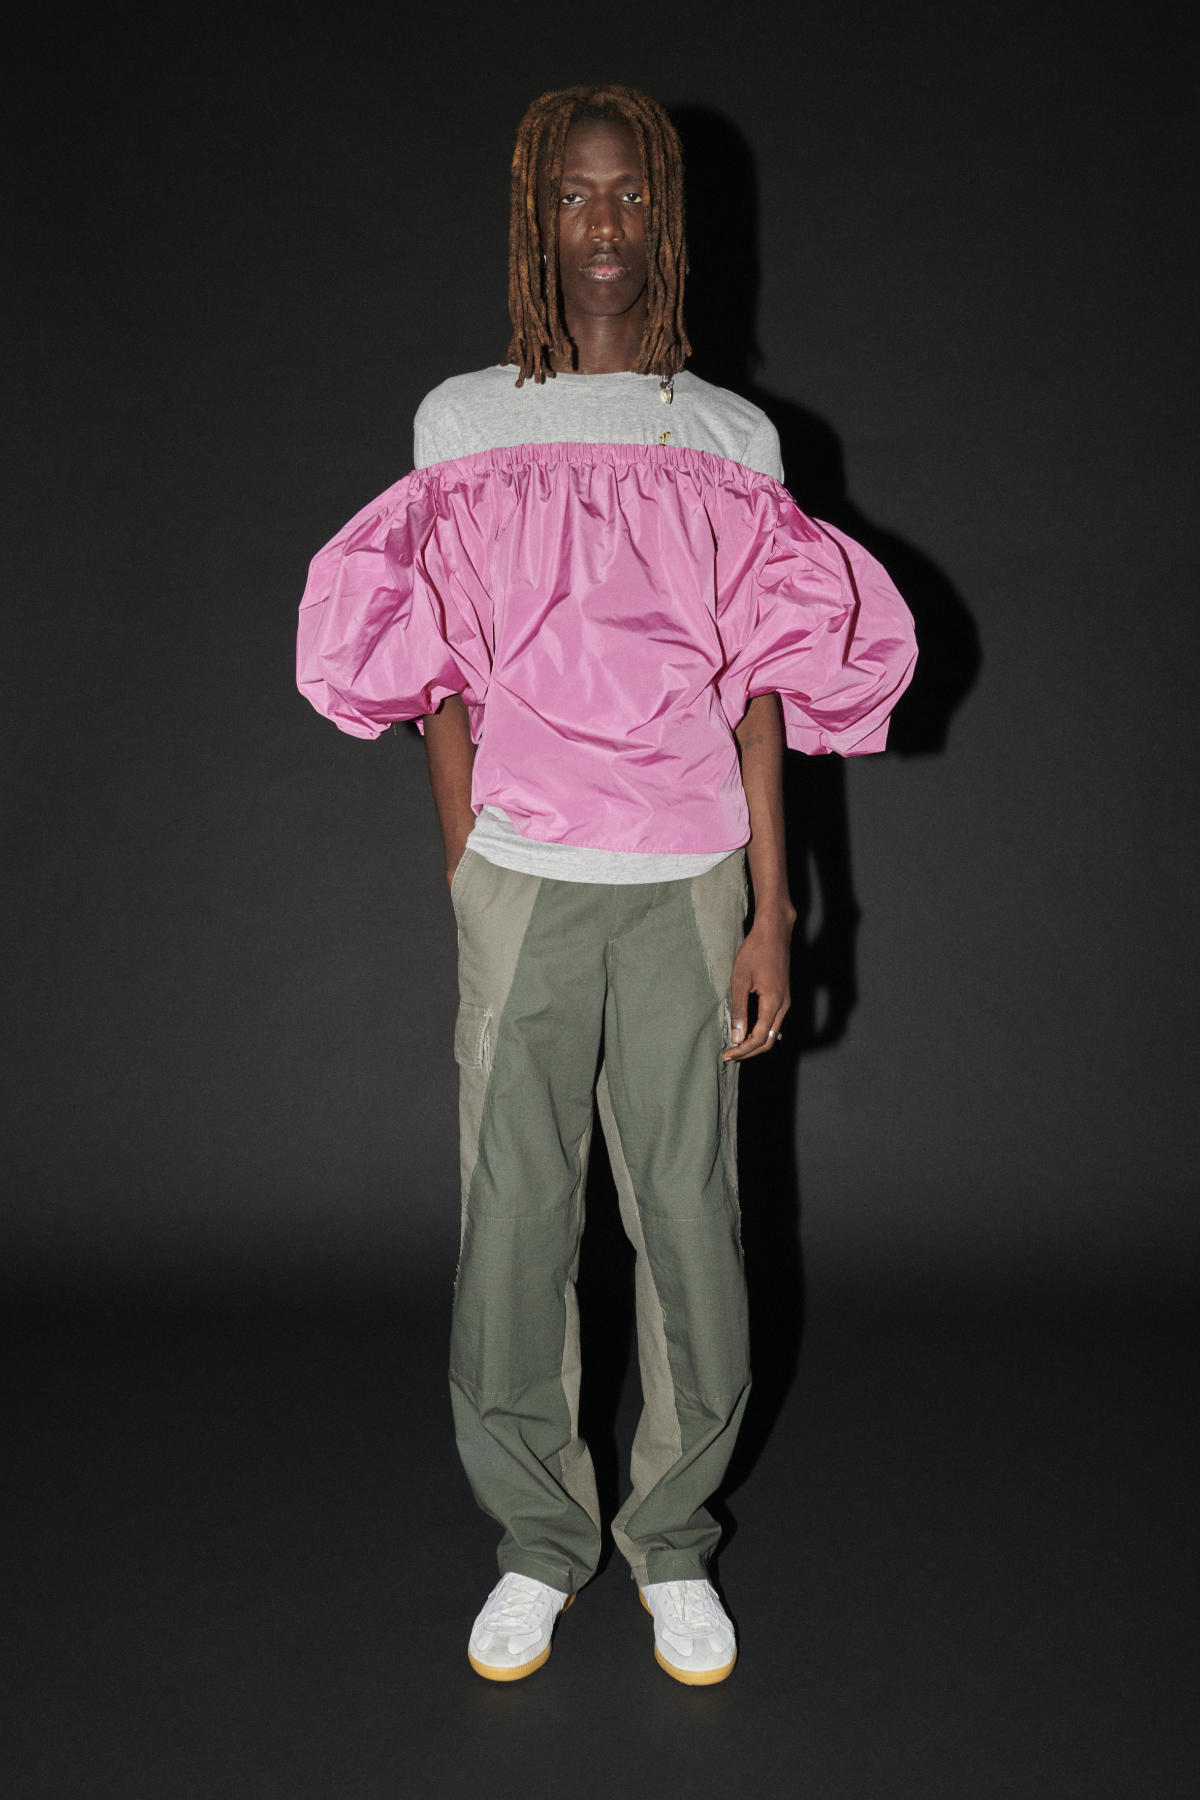 Lutz Huelle Presents Its New Spring Summer 2021 Collection